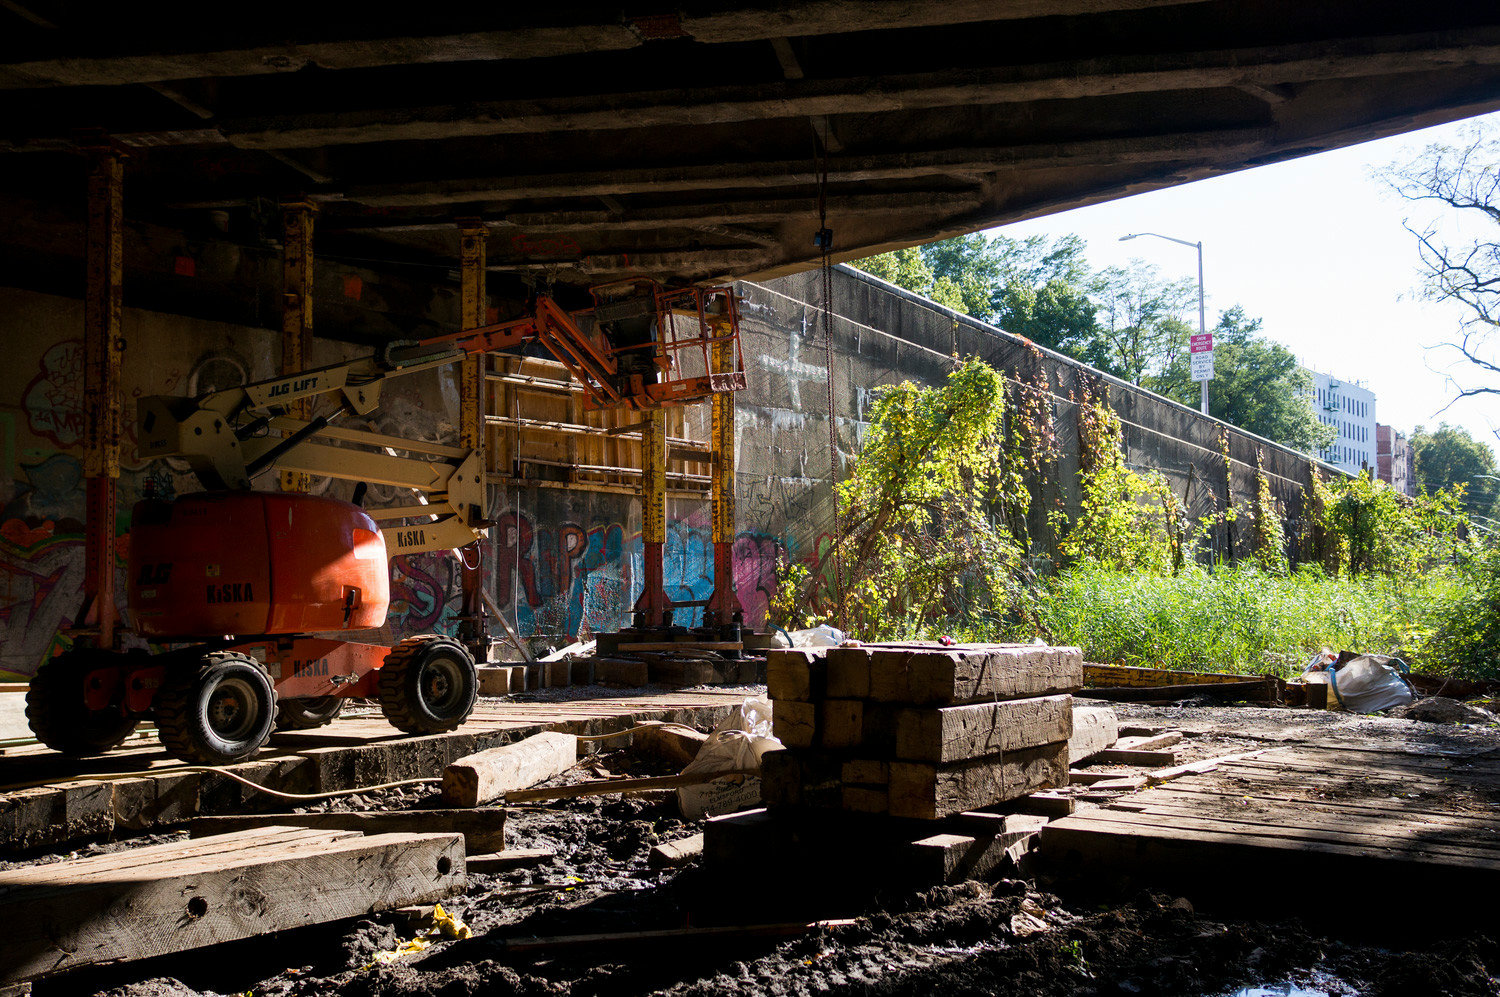 After years of waiting, CSX Transportation removed decades of trash and debris from what was once its Putnam Line tracks along the Major Deegan Expressway. After years and years of negotiations, the company has finally agreed to sell the property for $11.2 million.